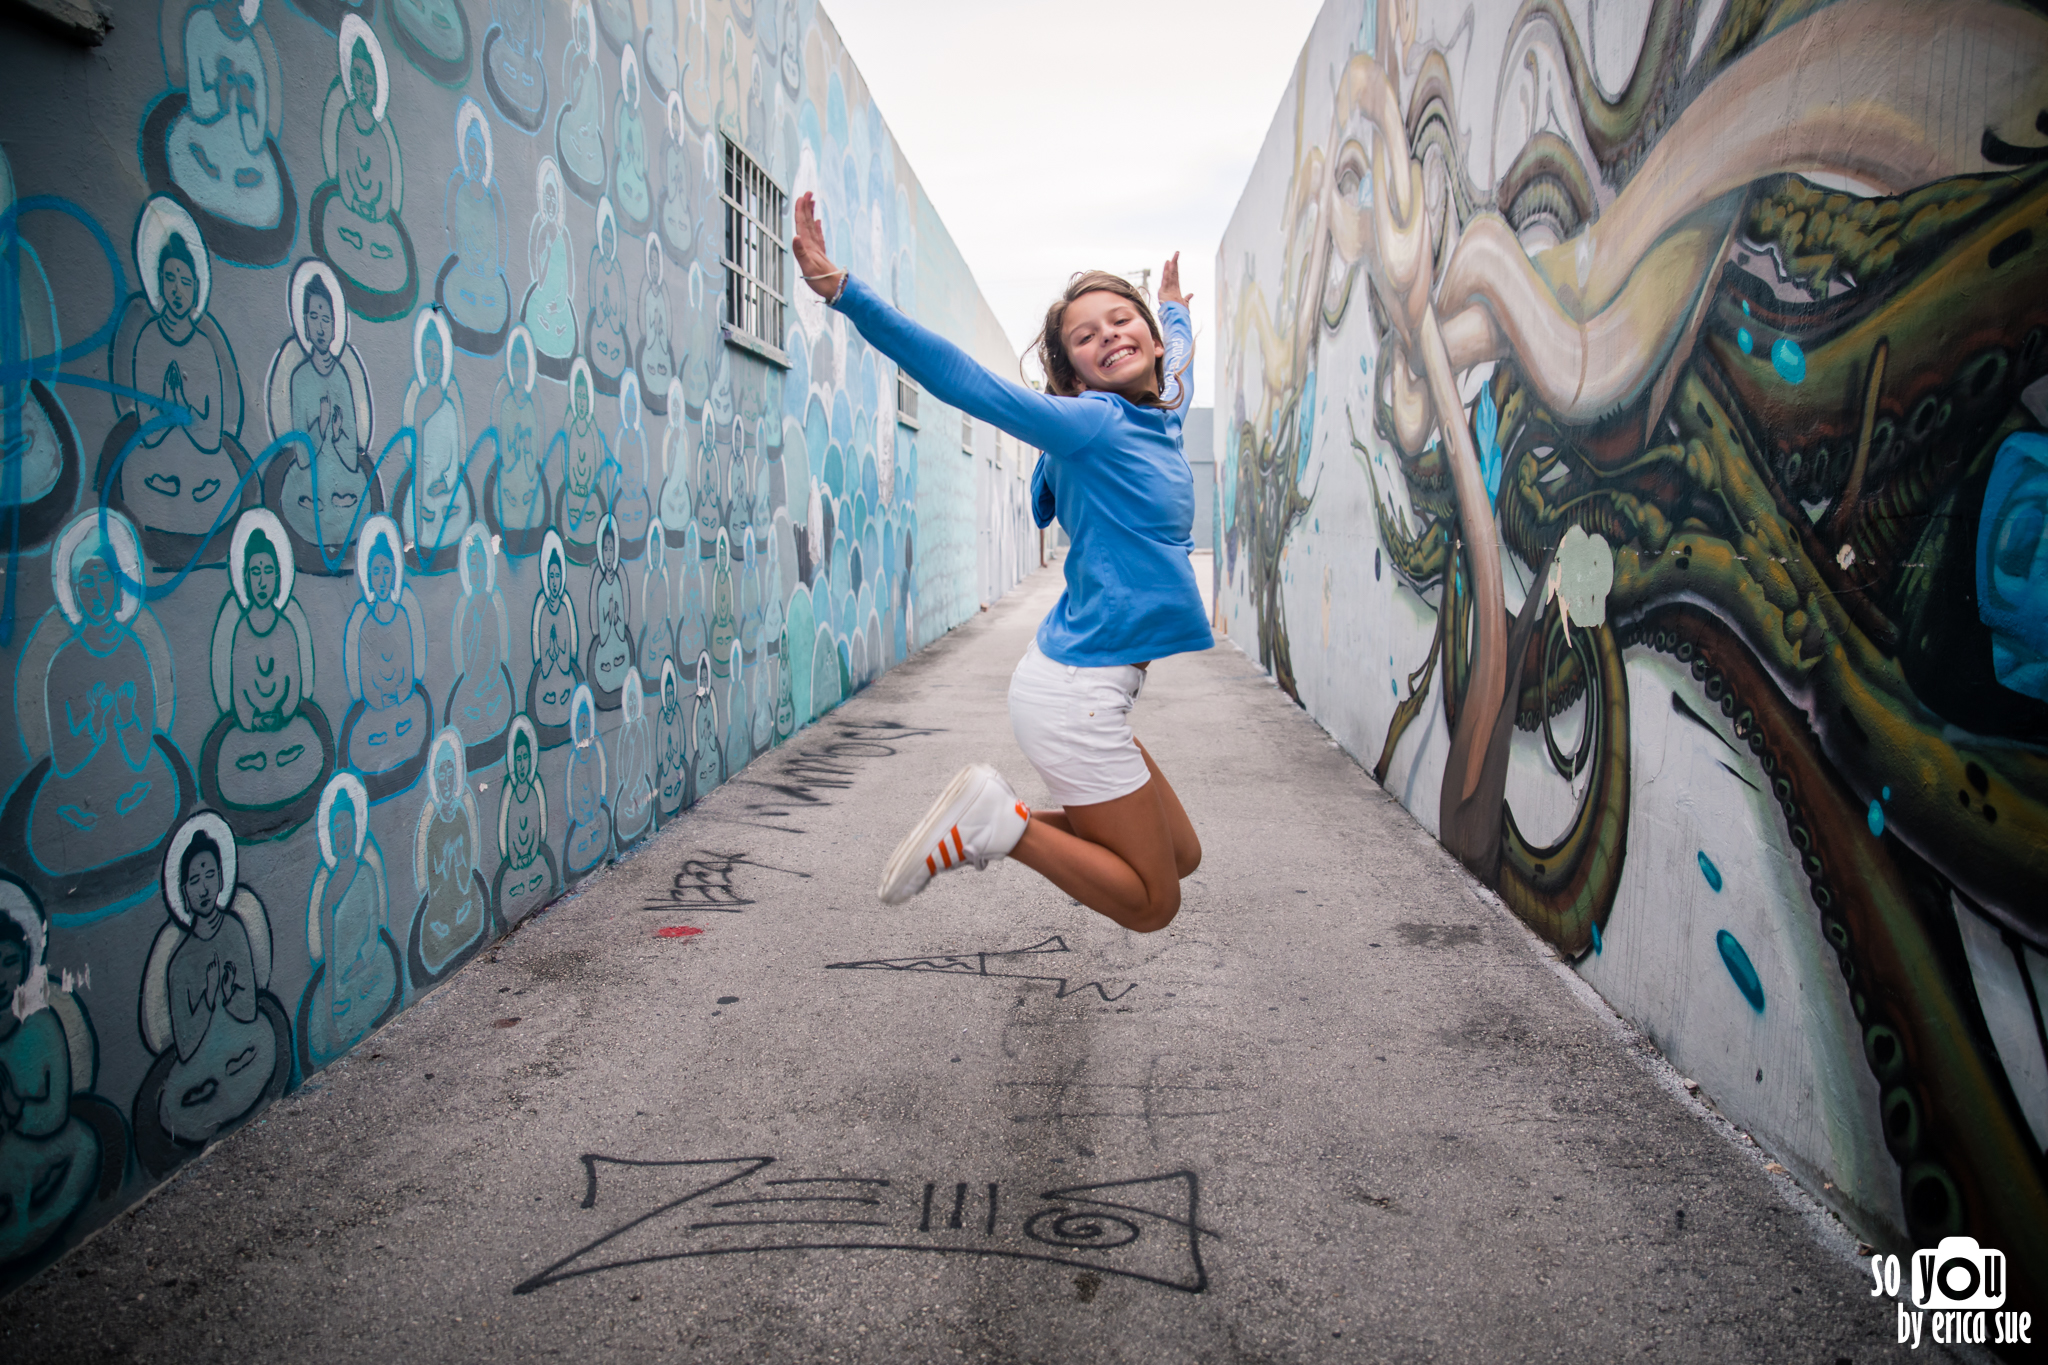 so-you-by-erica-sue-wynwood-walls-miami-photography-mitzvah-pre-shoot-5524.jpg